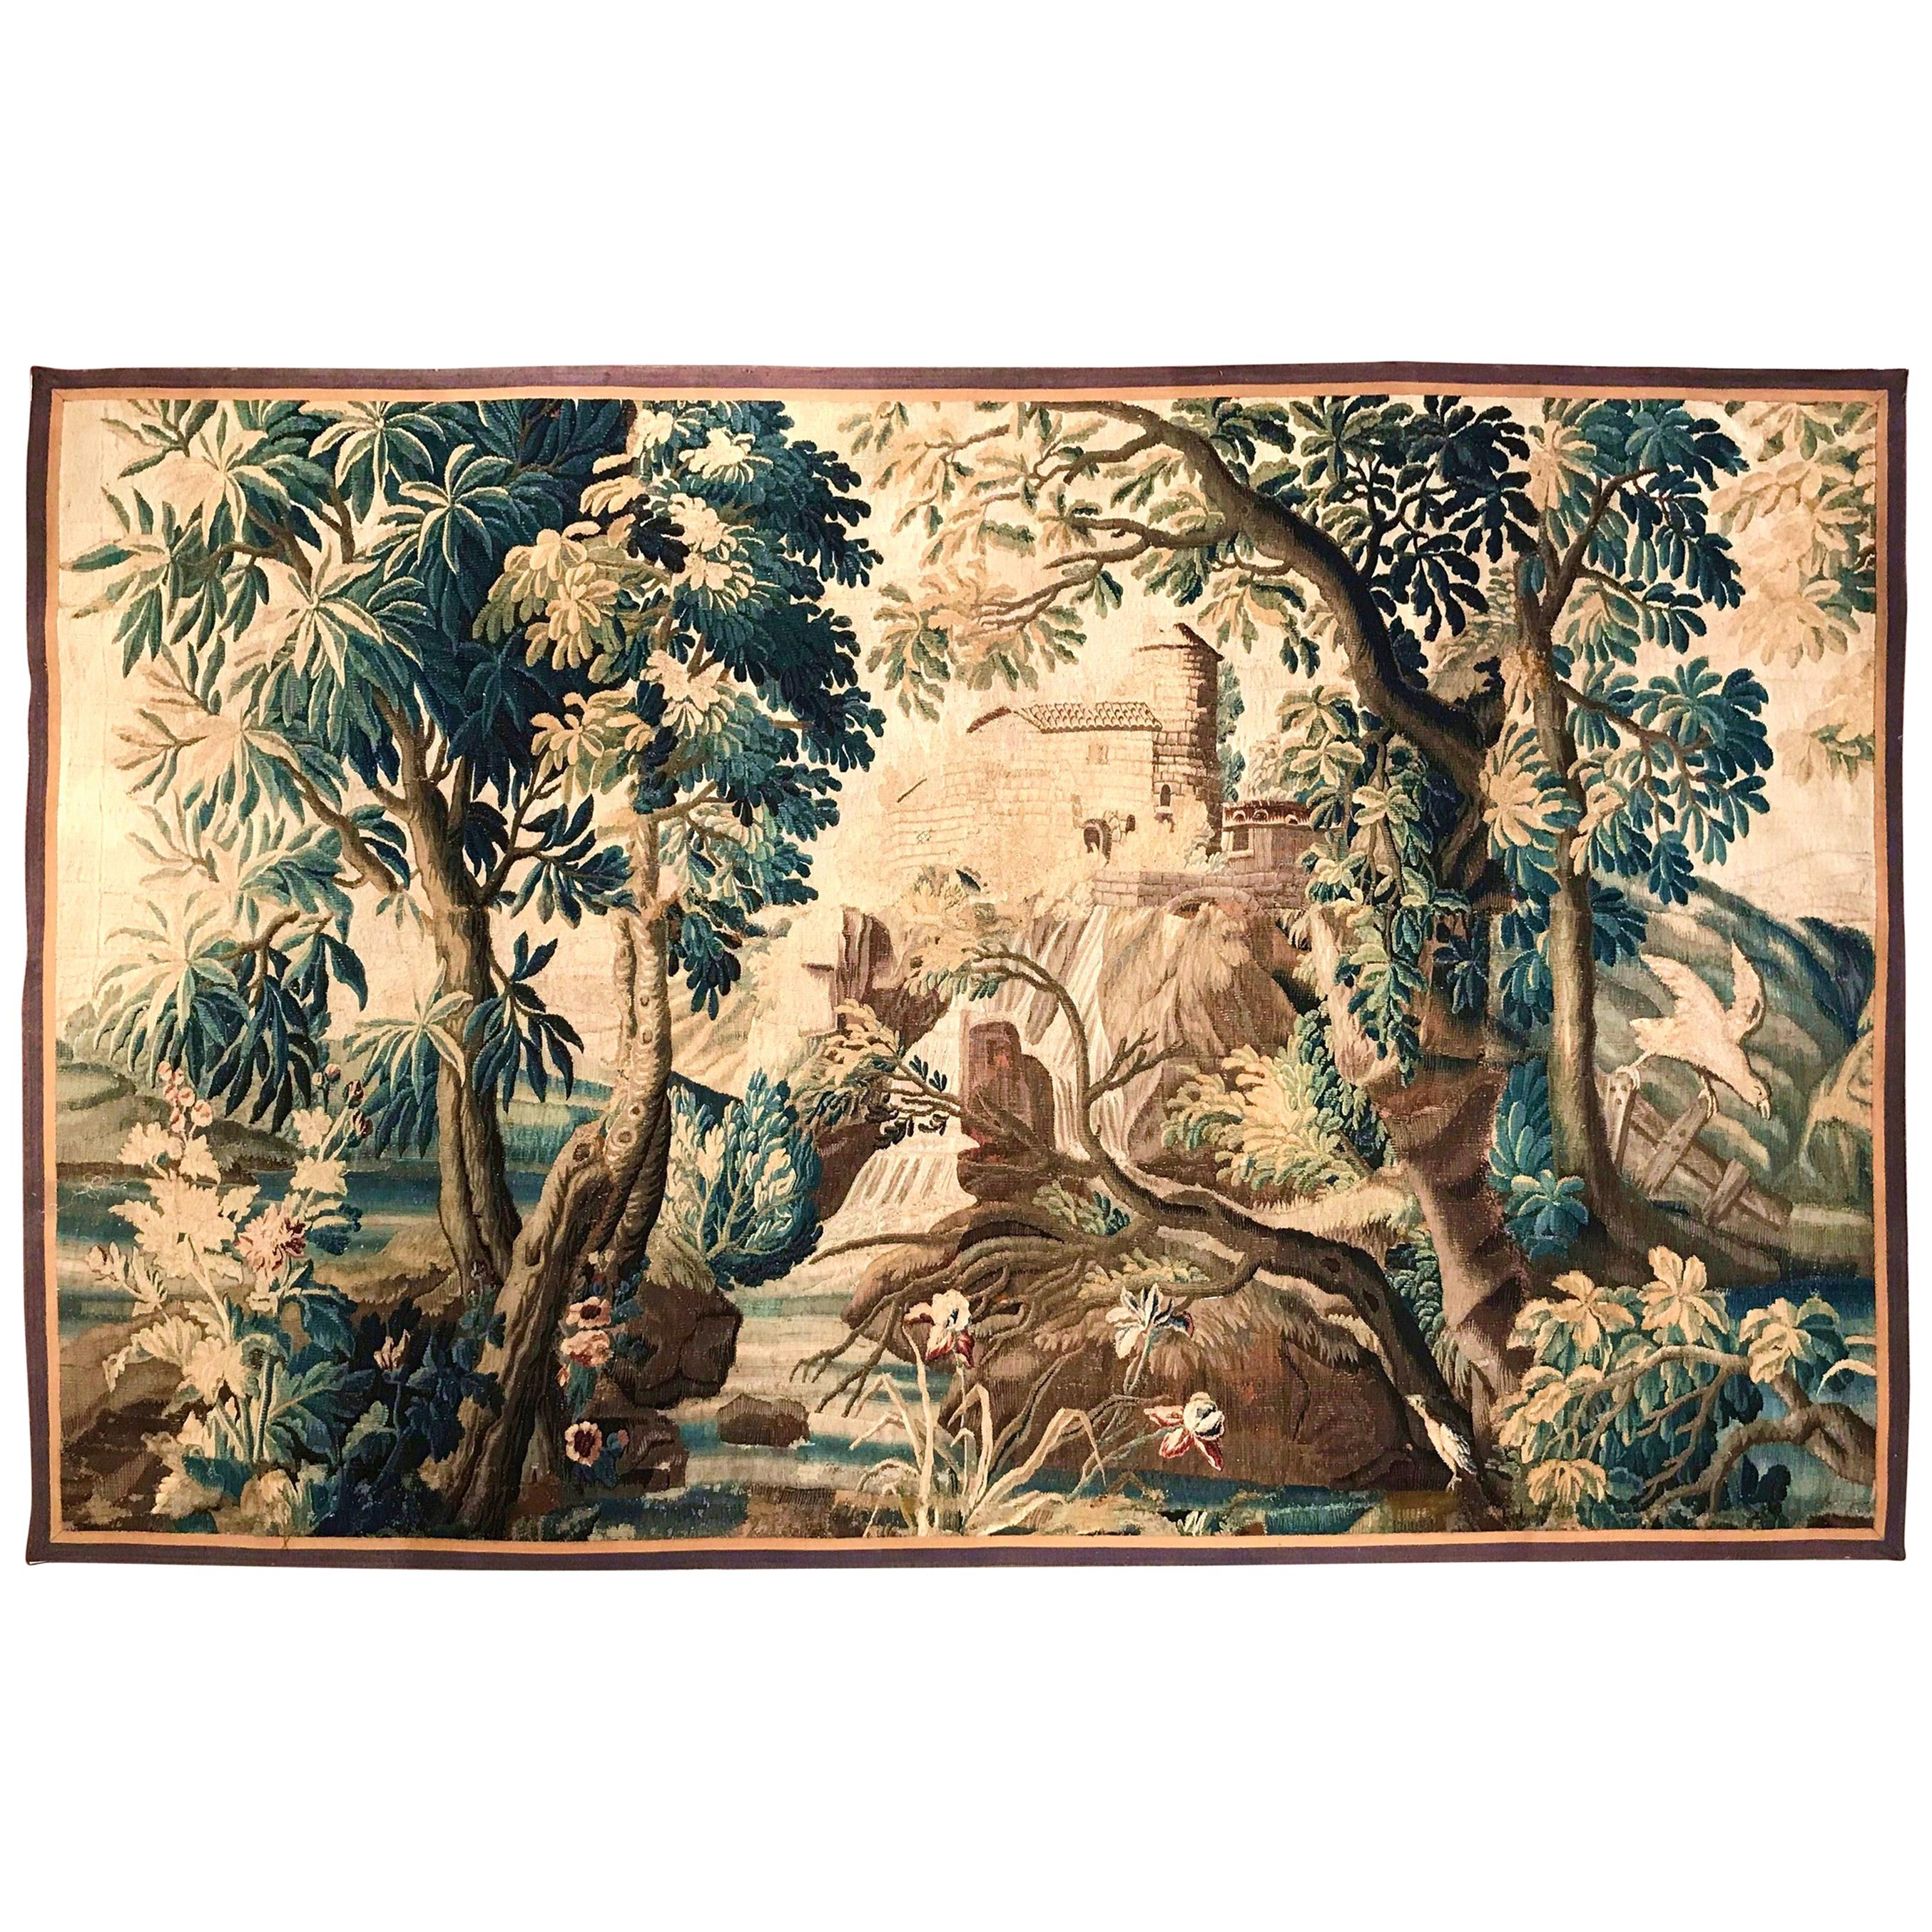 Large 18th Century French Verdure Aubusson Tapestry with Bird, Stream and Castle